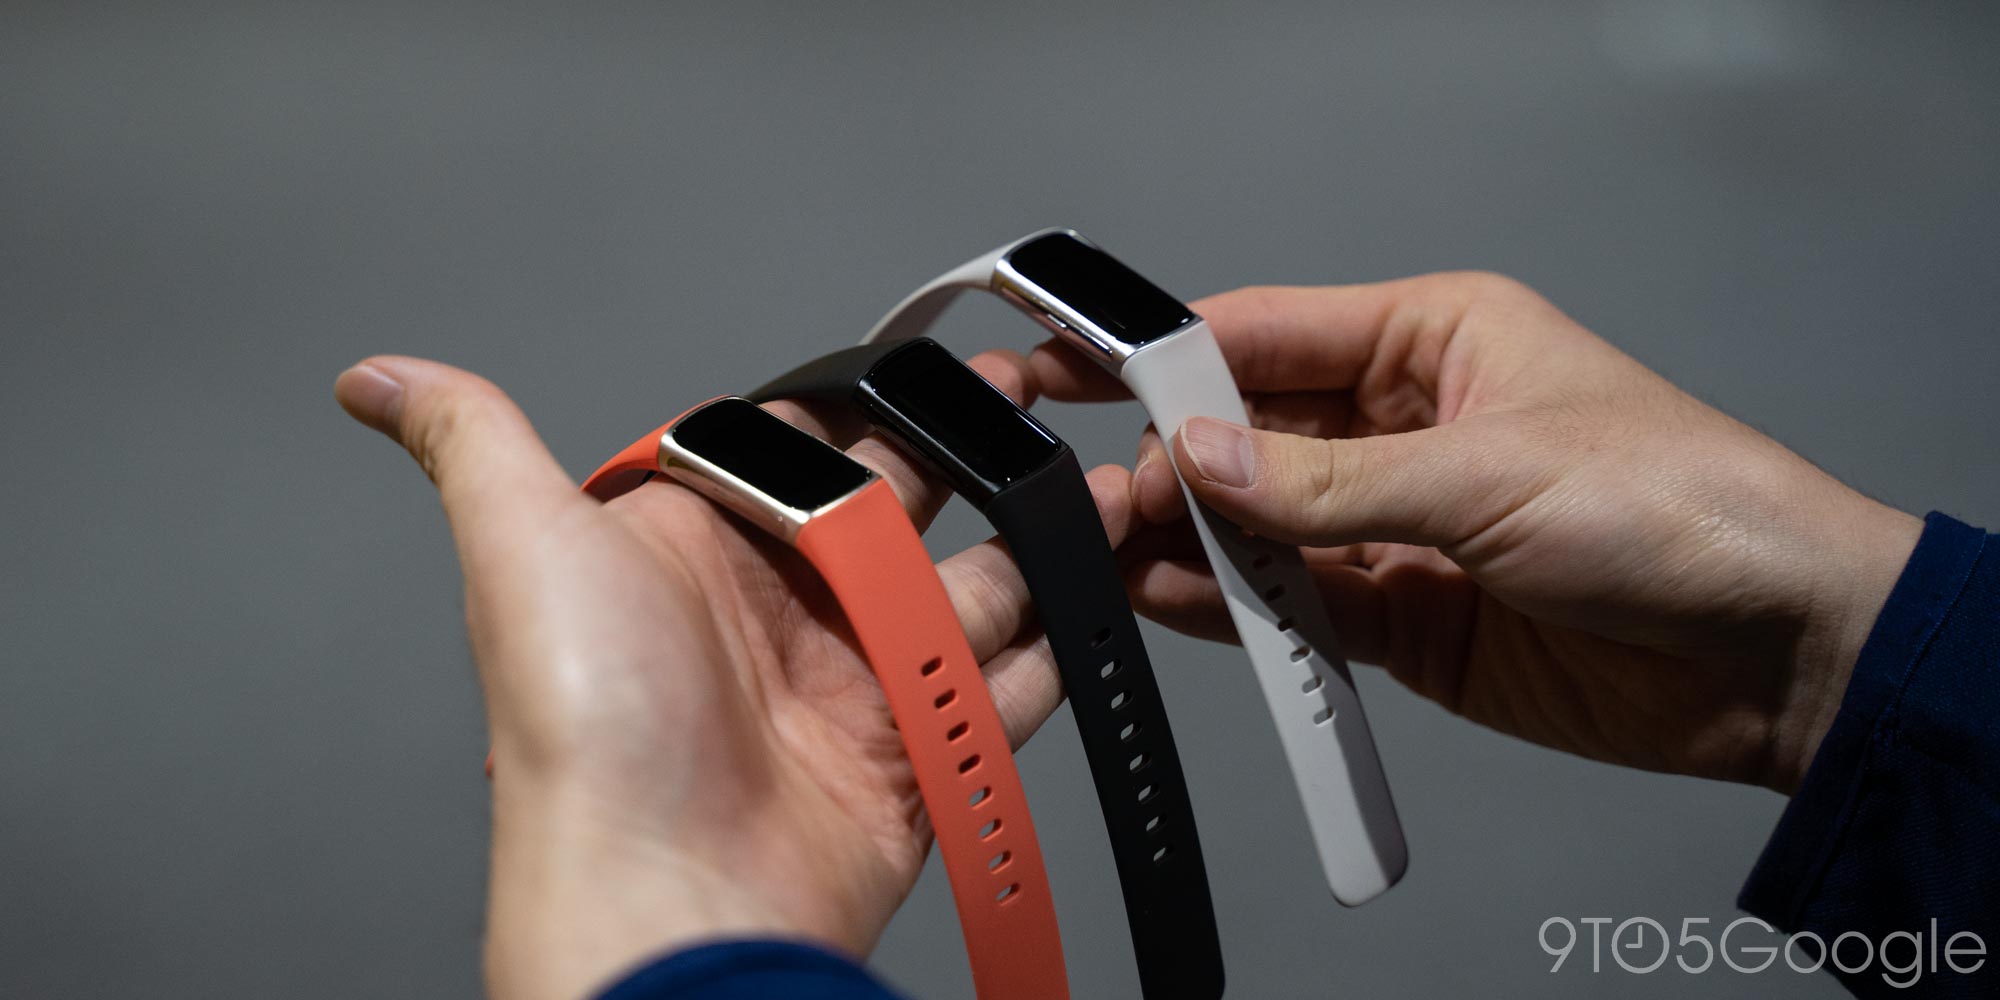 Fitbit Charge 6 Fitness Tracker Offers Advanced Machine Learning